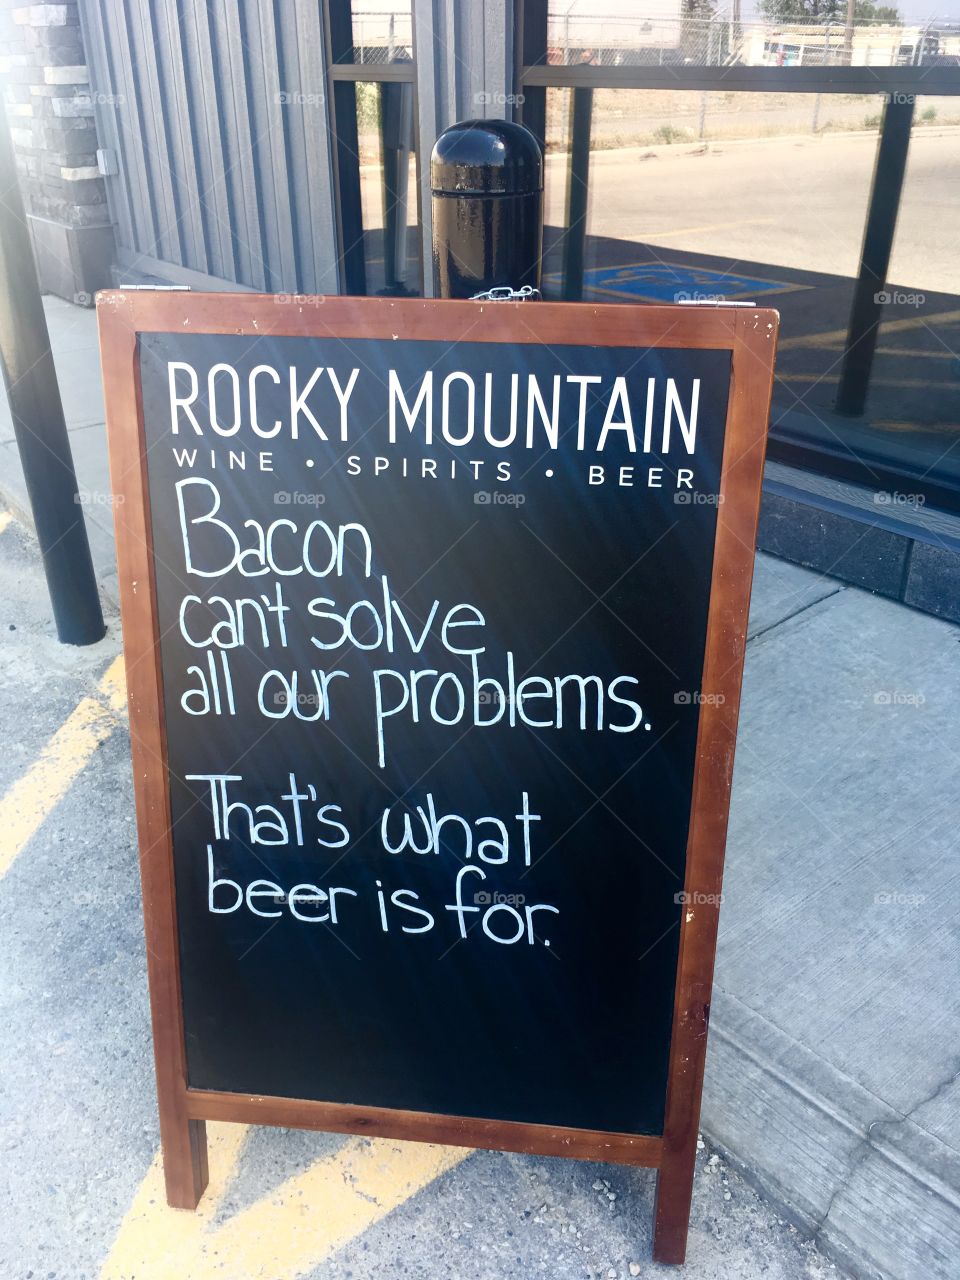 Never go wrong with beer and food